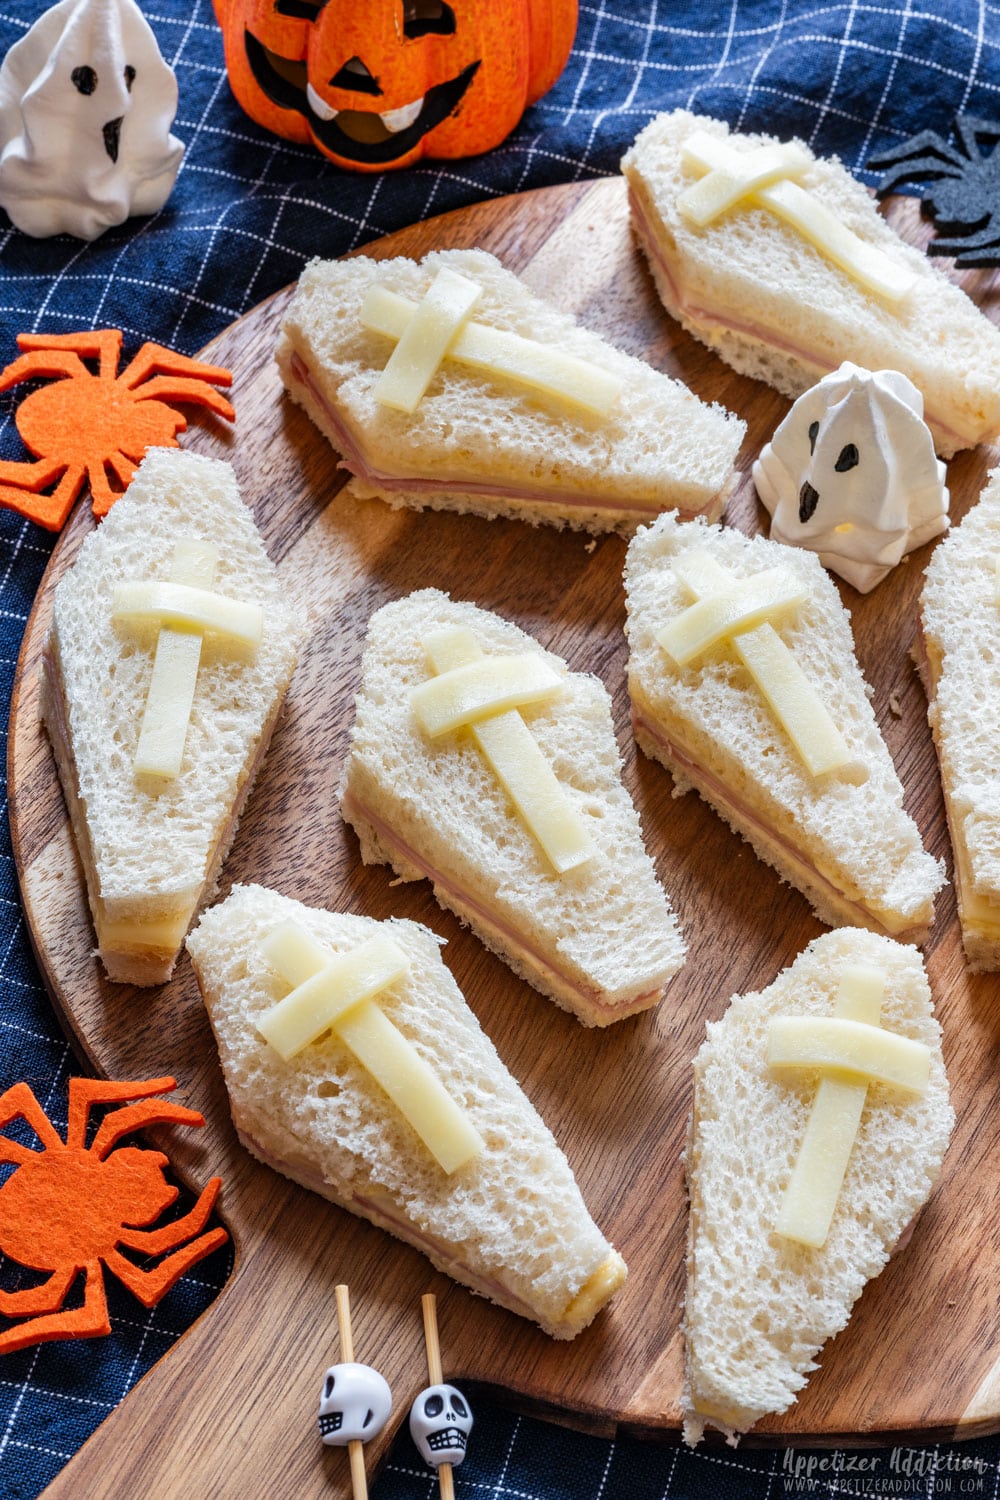 Halloween coffin sandwiches with spiders, ghost and pumpkin.